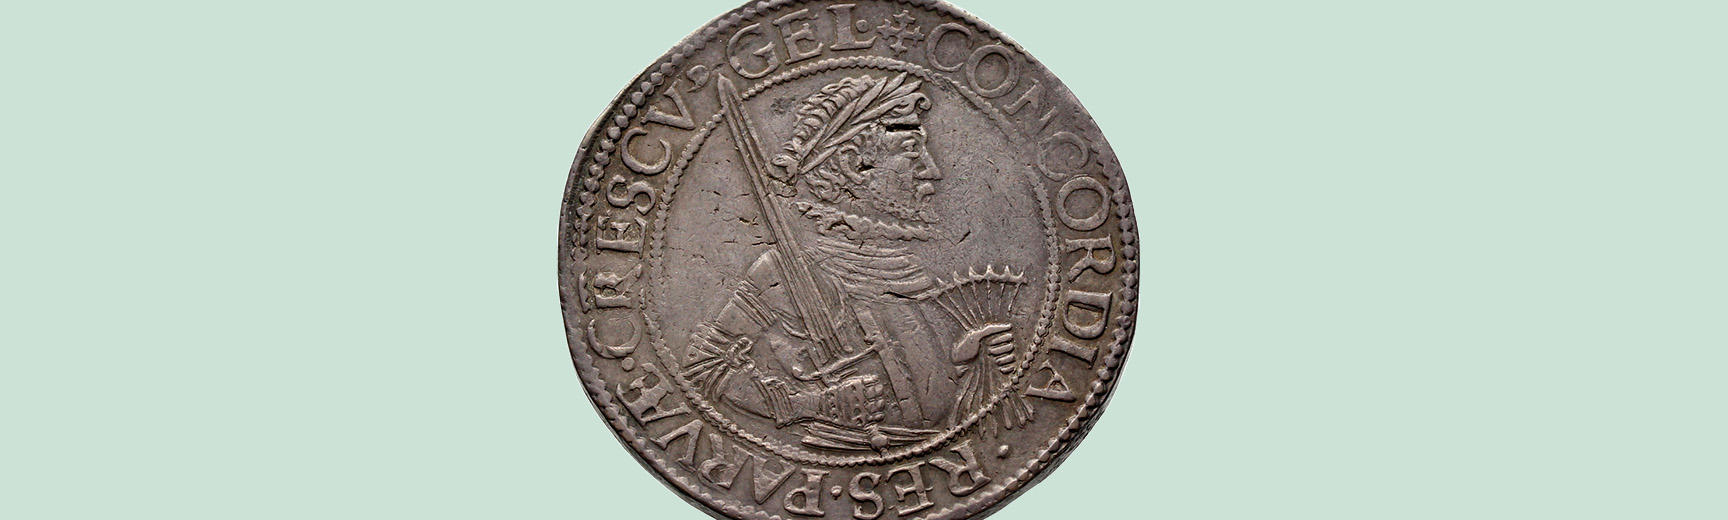 Silver coin front (Leicesterrijksdaalder) of Robert Dudley, Earl of Leicester, Lord of Denbigh, 1564-1588 from Harderwijk (Modern), 1587